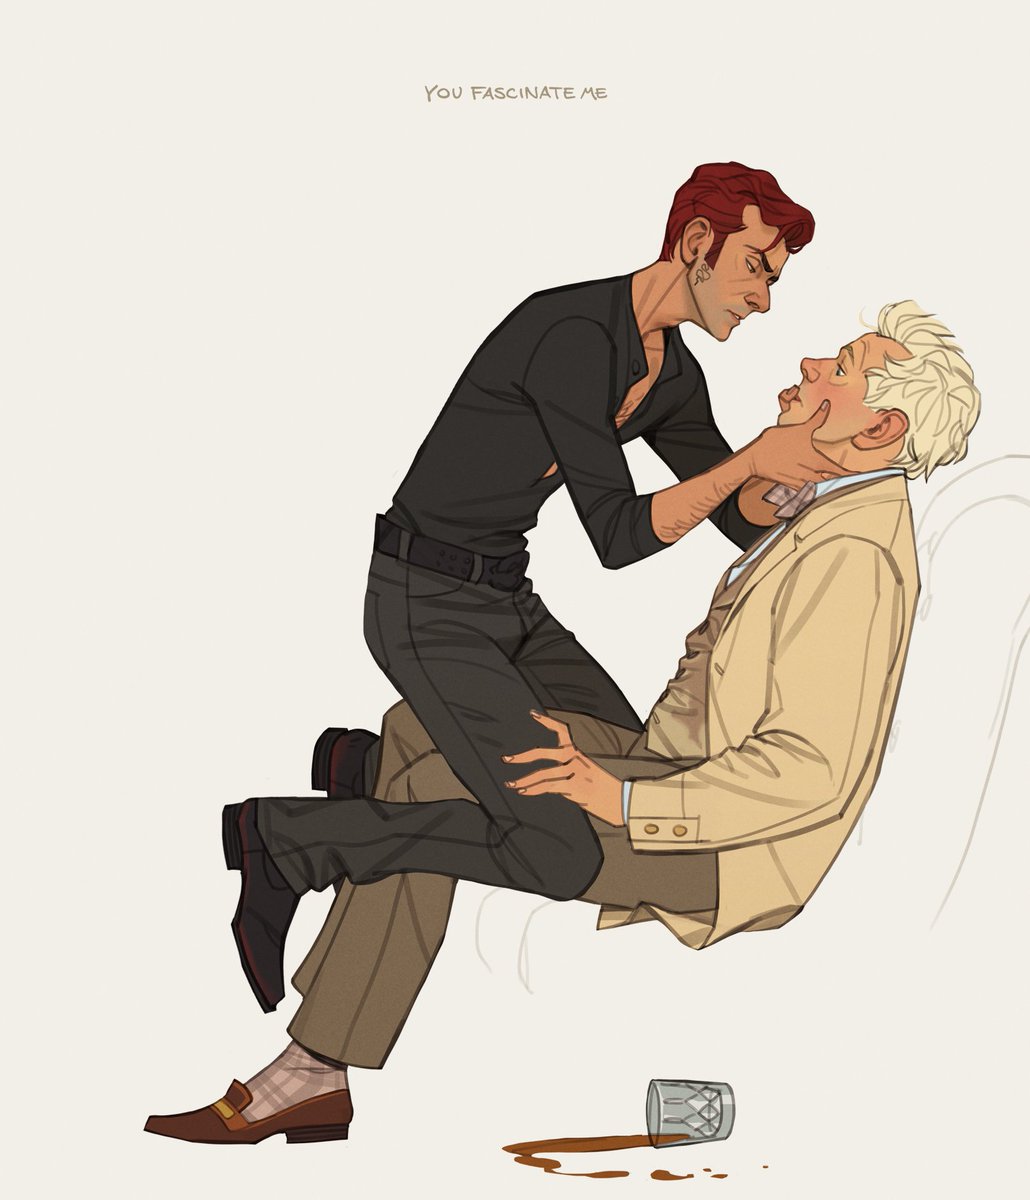 I have a feeling that beneath the little halo on your noble head

There lies a thought or two the devil might be interested to know

You're like the finish of a novel that I'll finally have to take to bed

You fascinate me

#GoodOmens